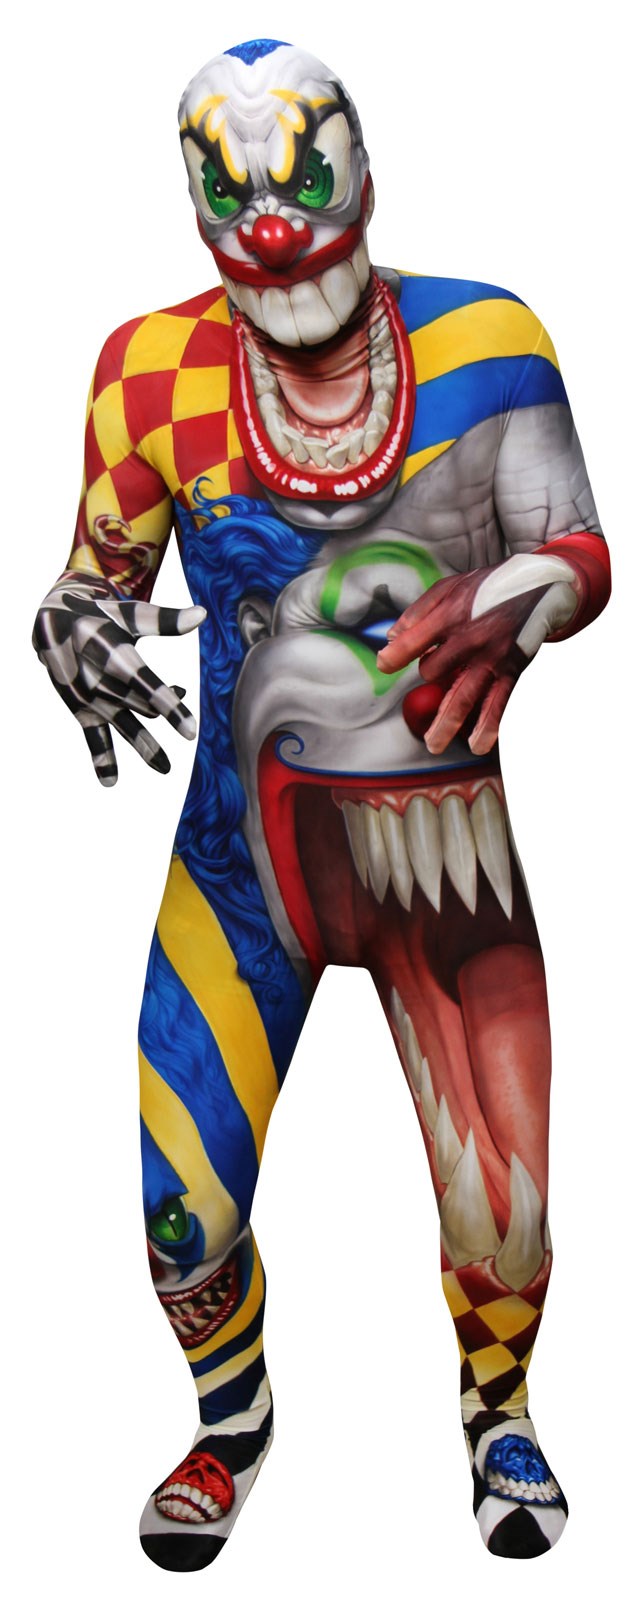 Monster Collection – Kids The Clown Morphsuit Costume